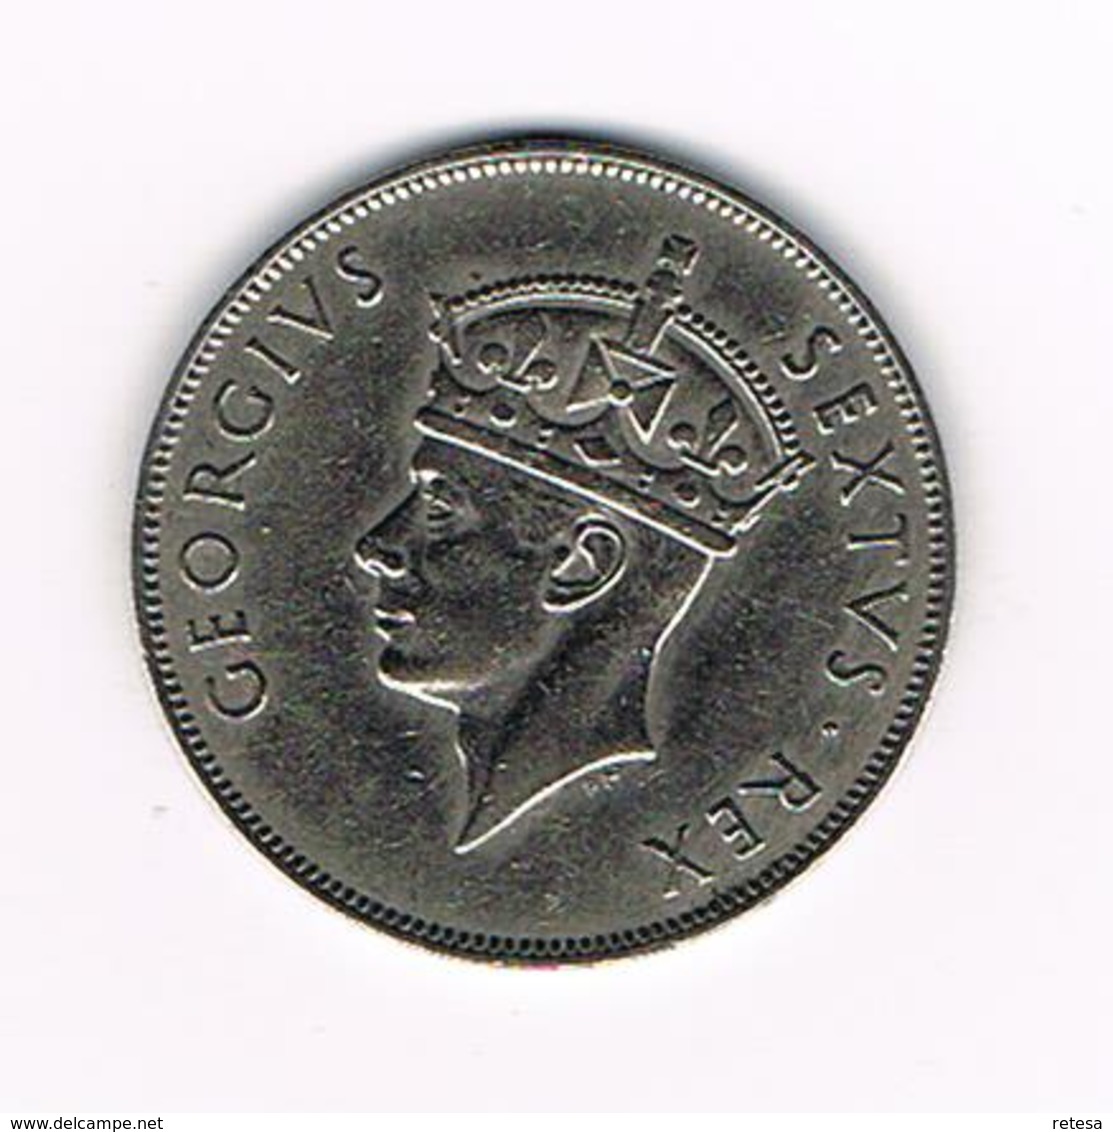 //  EAST  AFRICA  1 SHILLING  1950 - Colonies